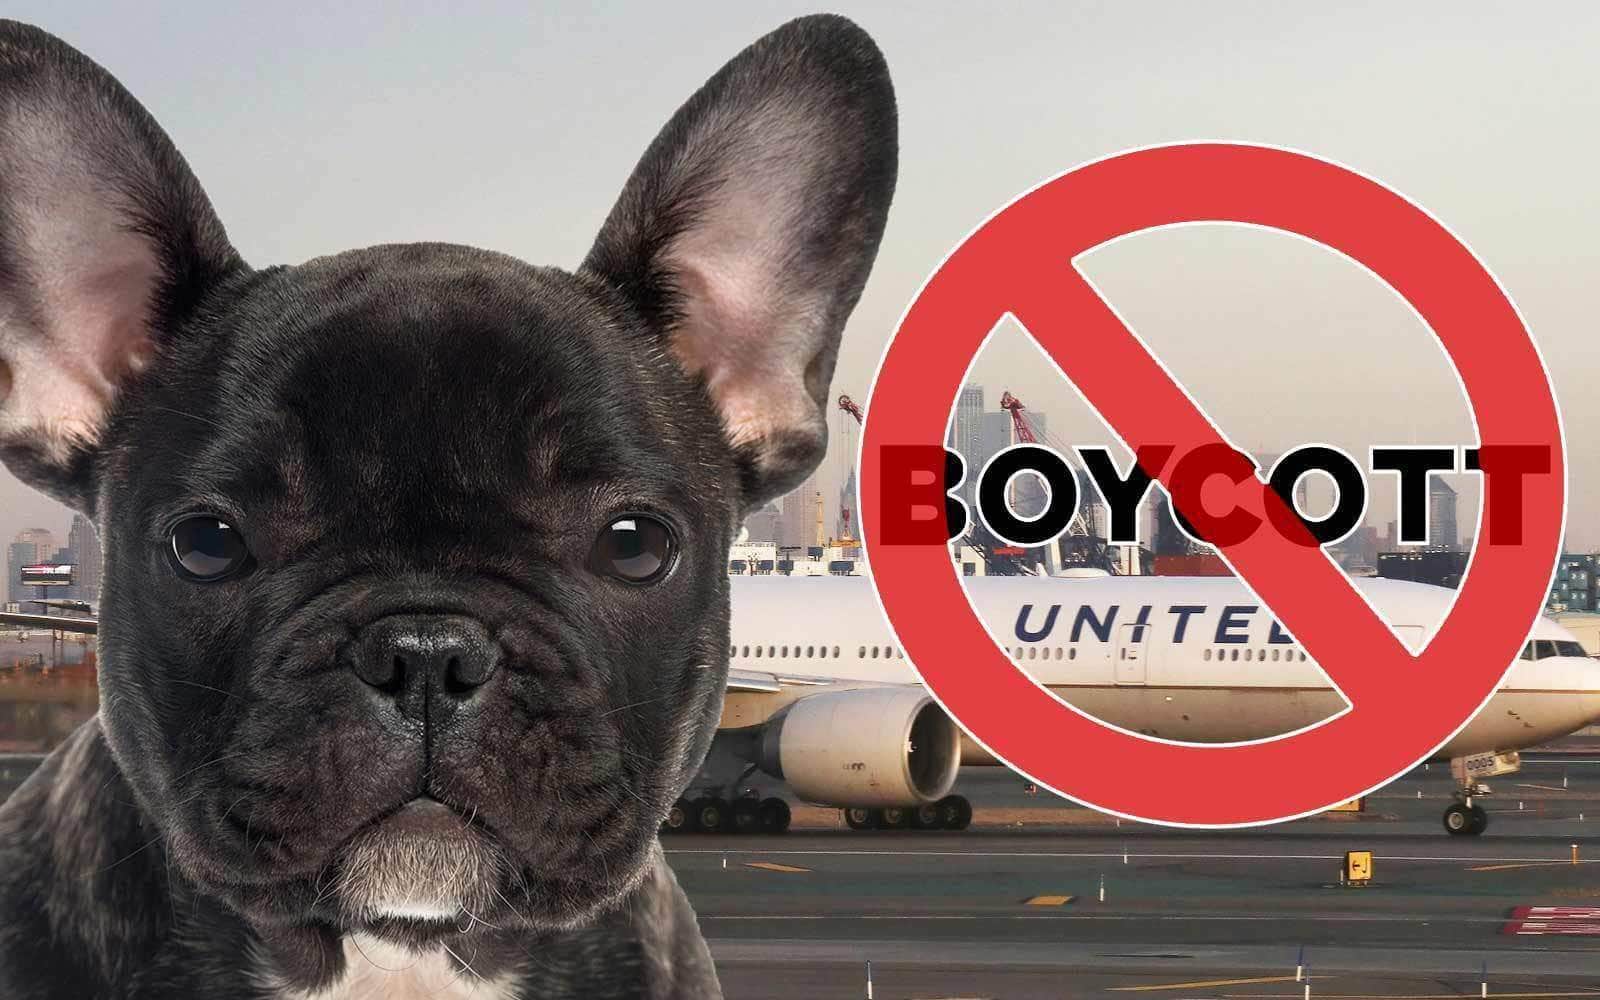 French Bulldog Dies In Overhead Bin on United Airlines